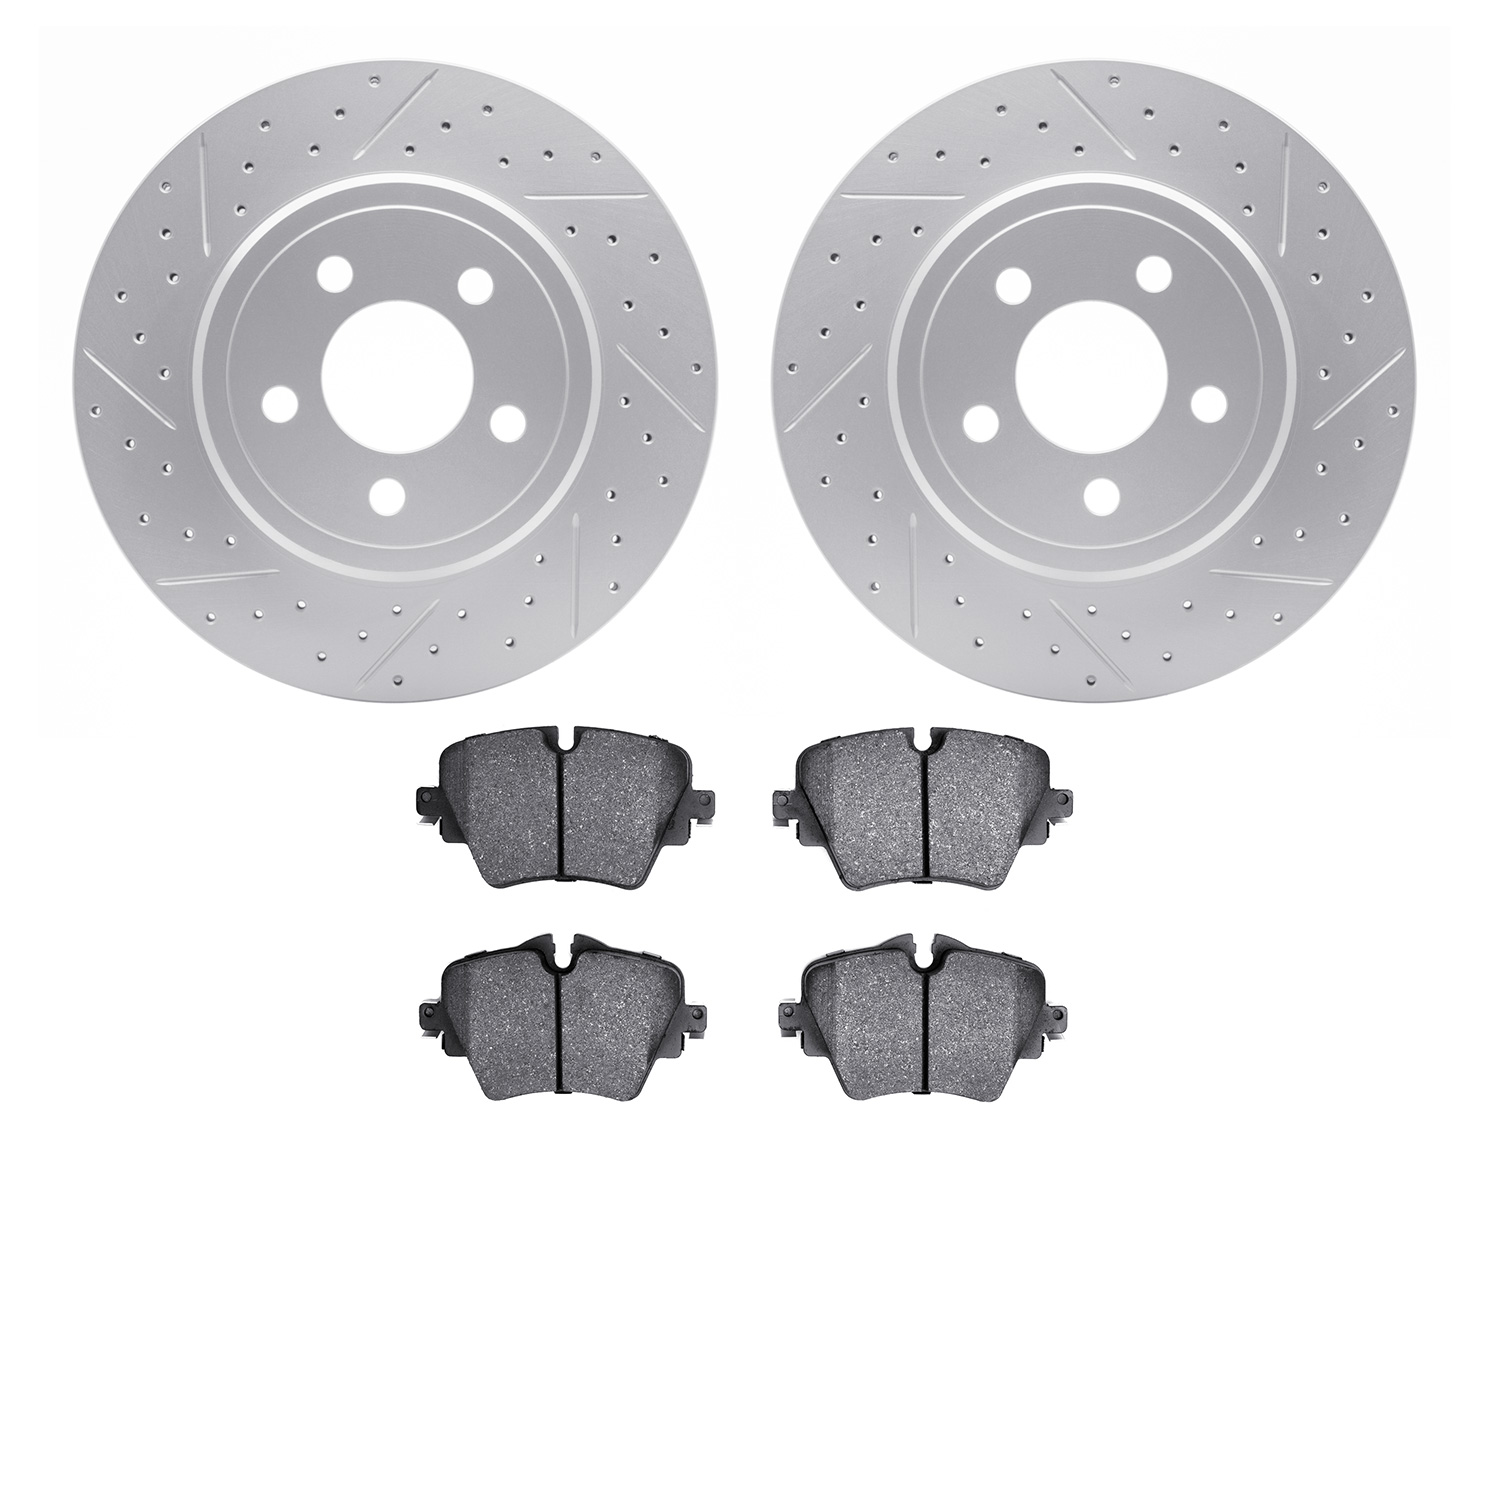 2502-32031 Geoperformance Drilled/Slotted Rotors w/5000 Advanced Brake Pads Kit, Fits Select Mini, Position: Front